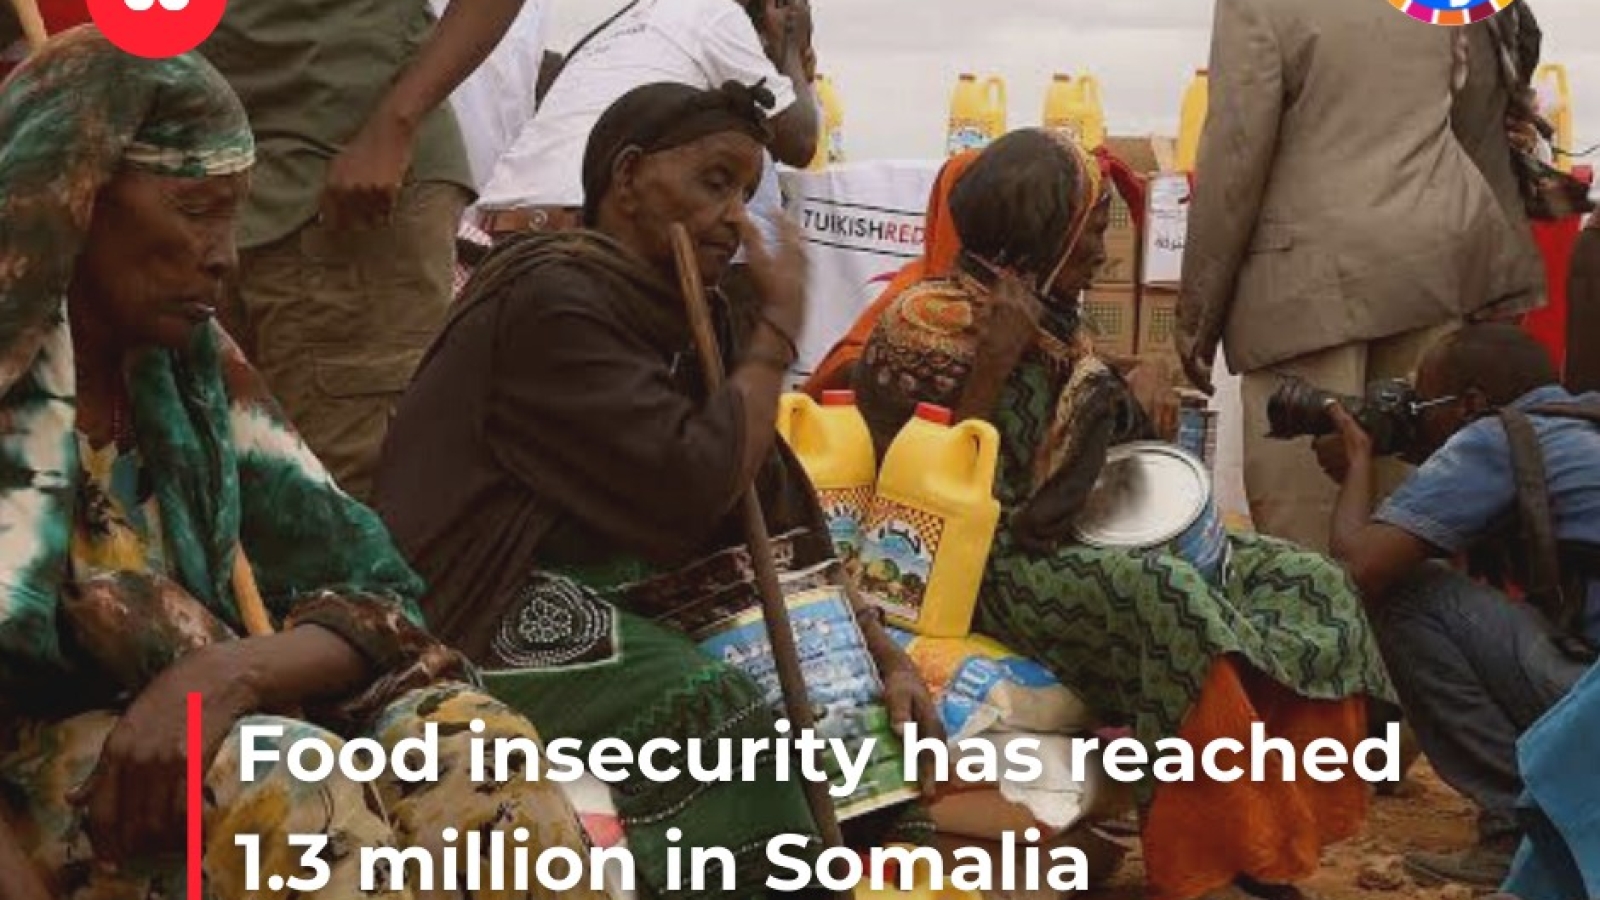 Food insecurity has reached 1.3 million in Somalia